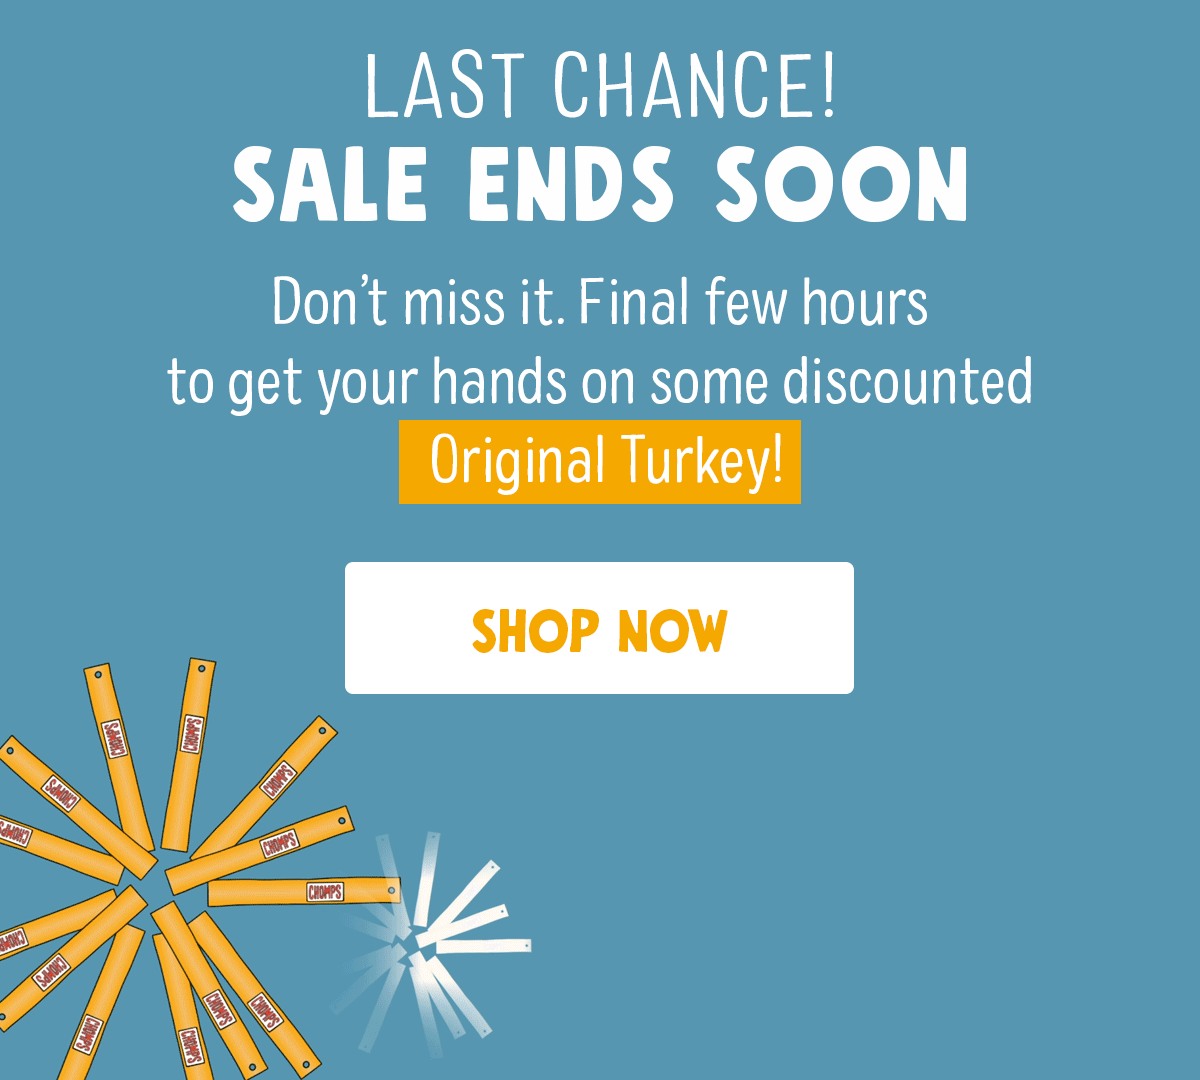 Final few hours to get your hands on some discounted Chomps! Don't miss it.